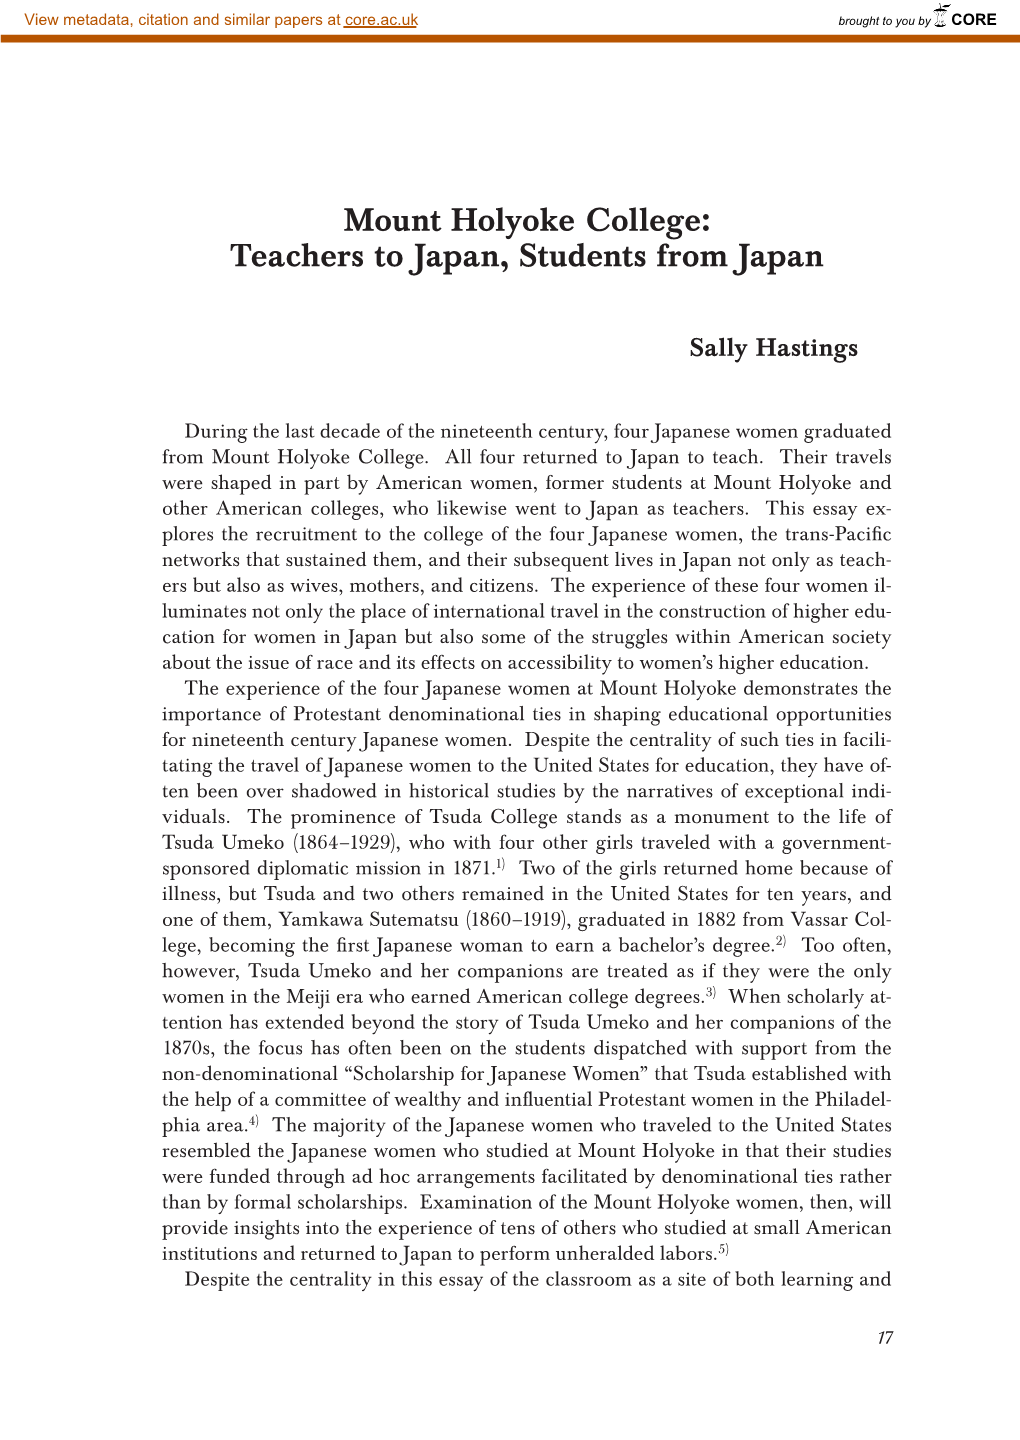 Mount Holyoke College: Teachers to Japan, Students from Japan